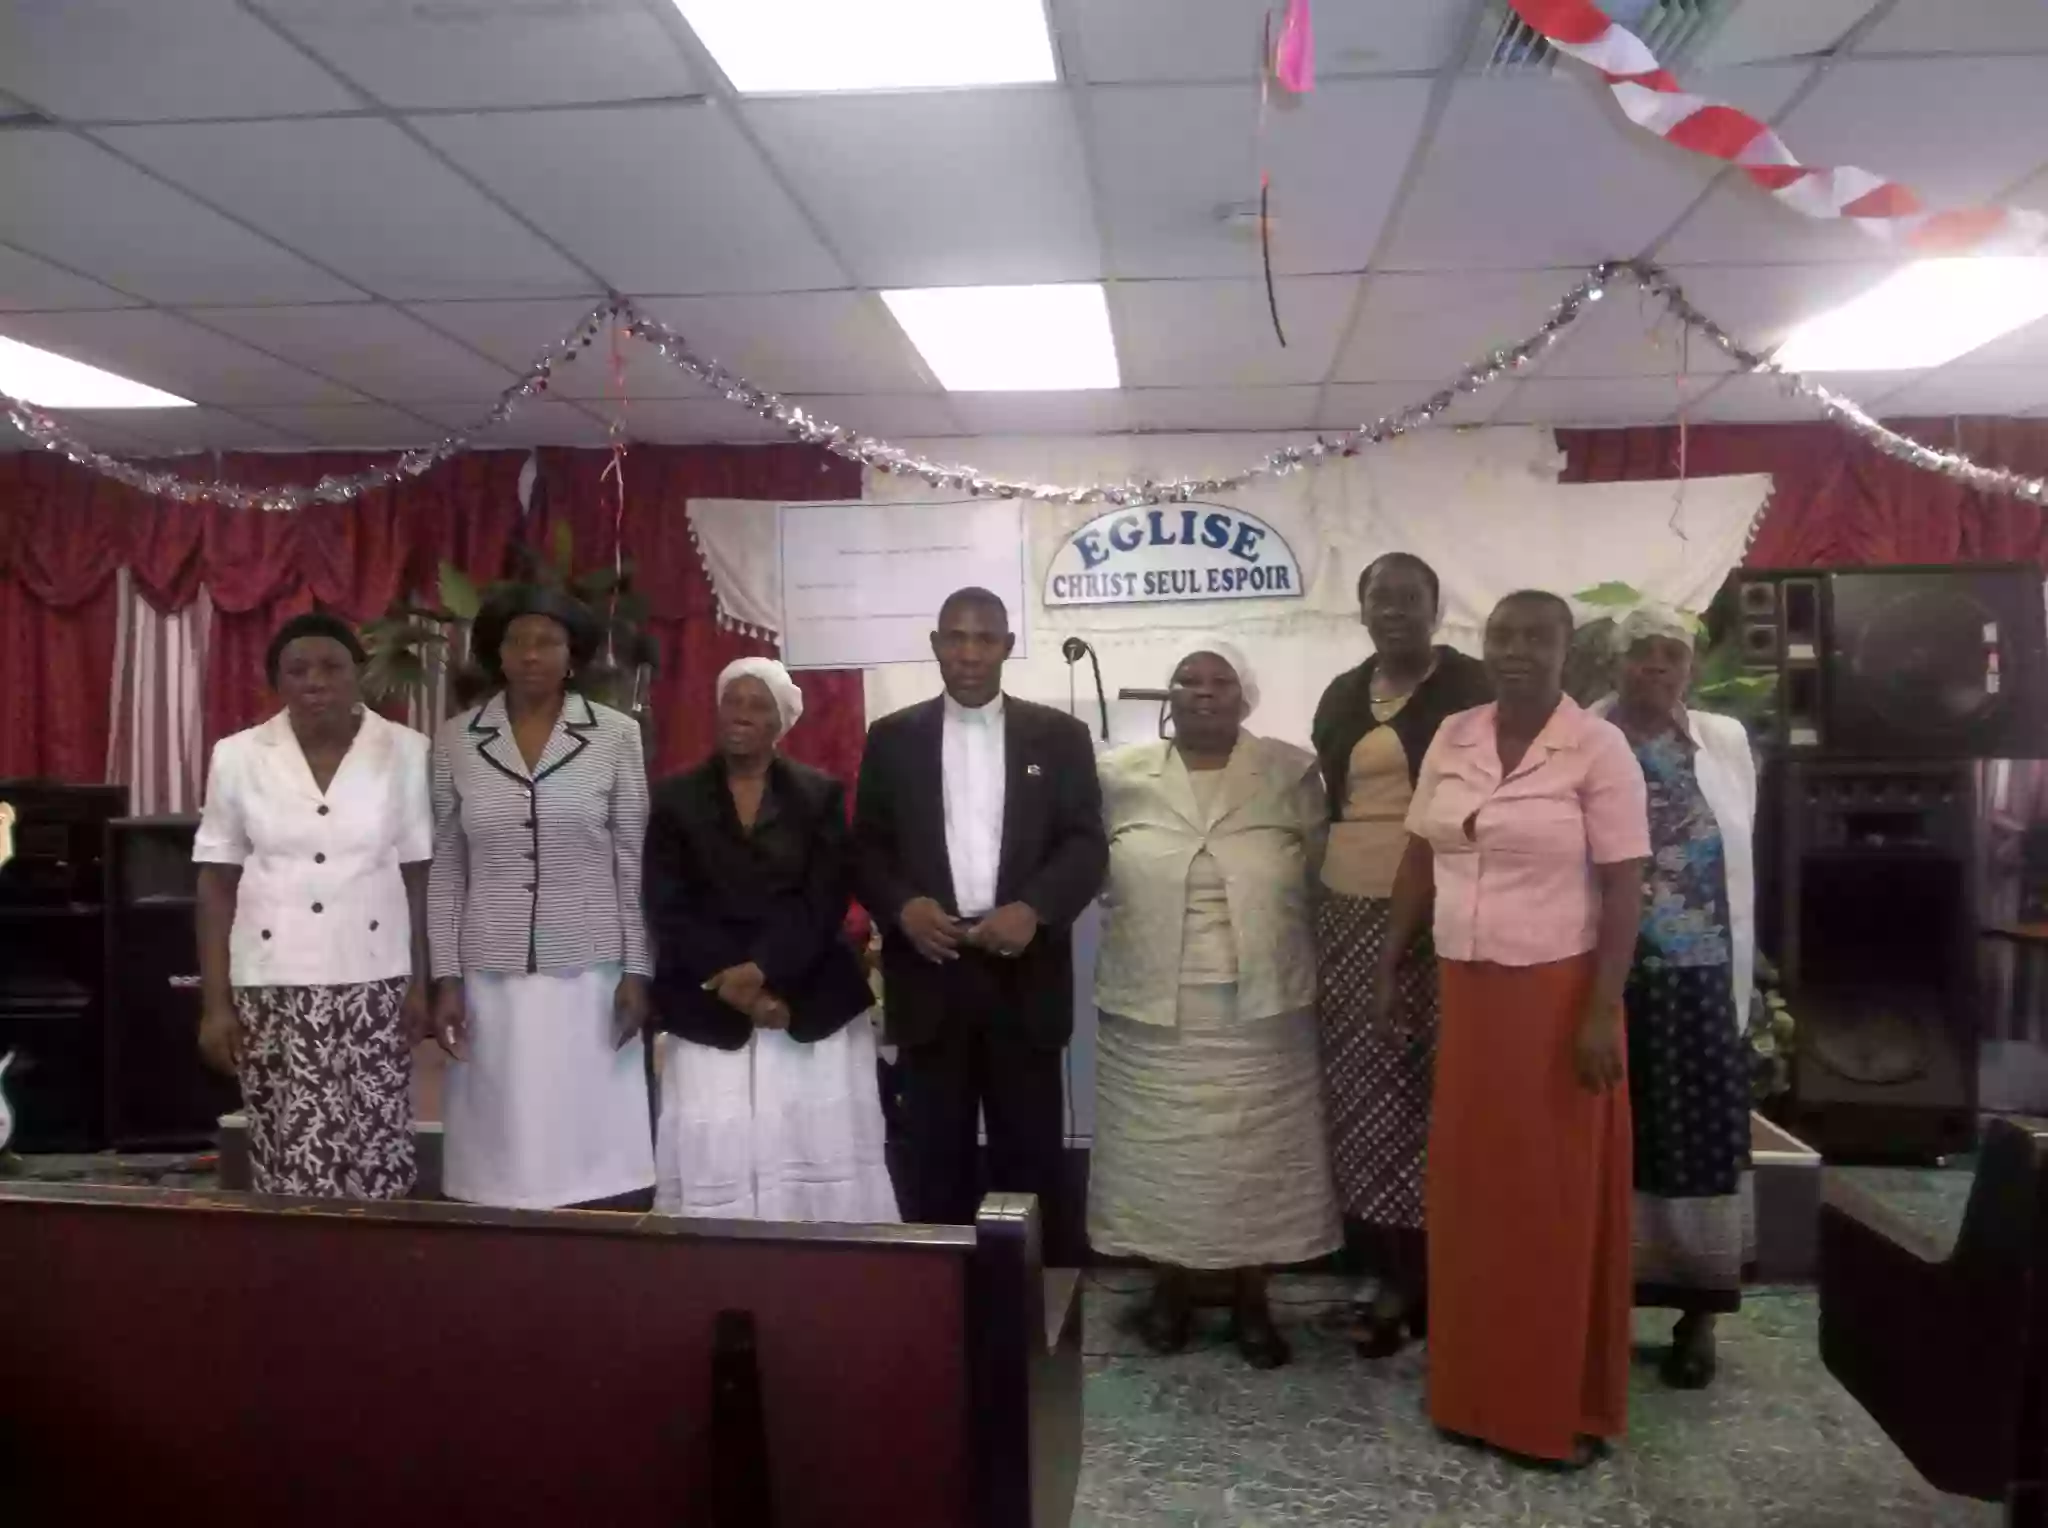 Visionist Theological Bible Institute Inc